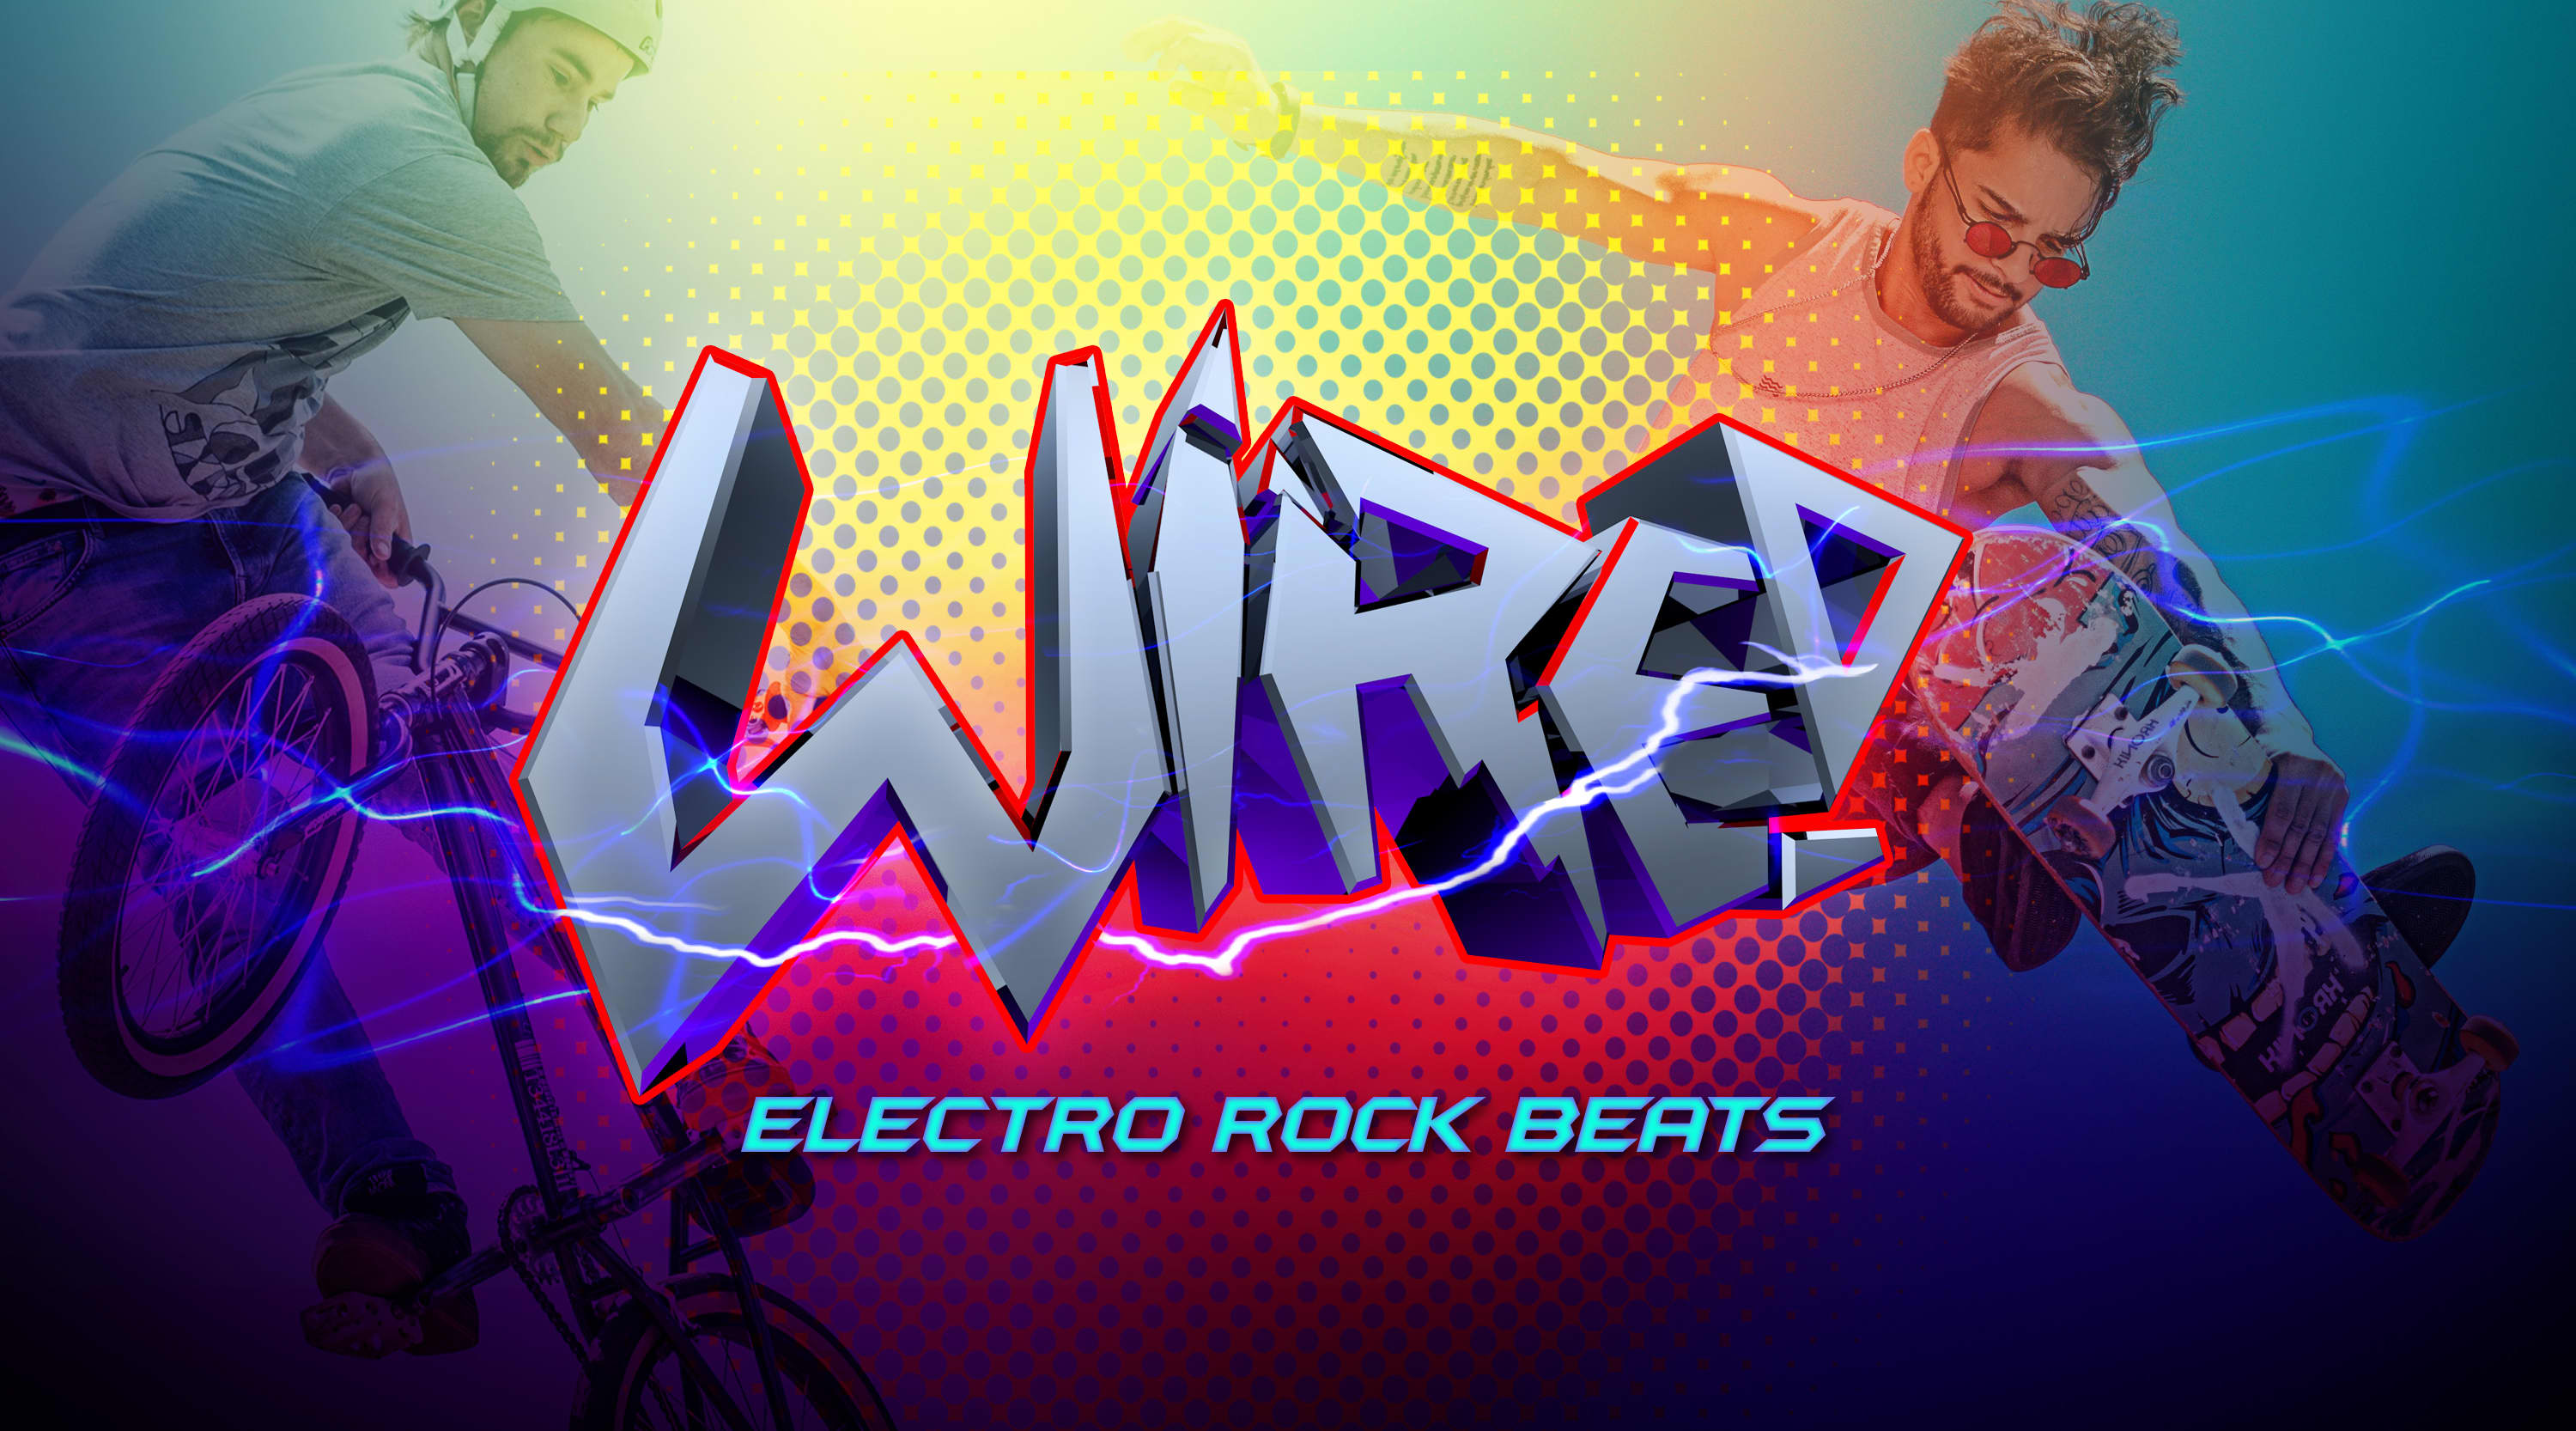 Wired Electro Rock Beats